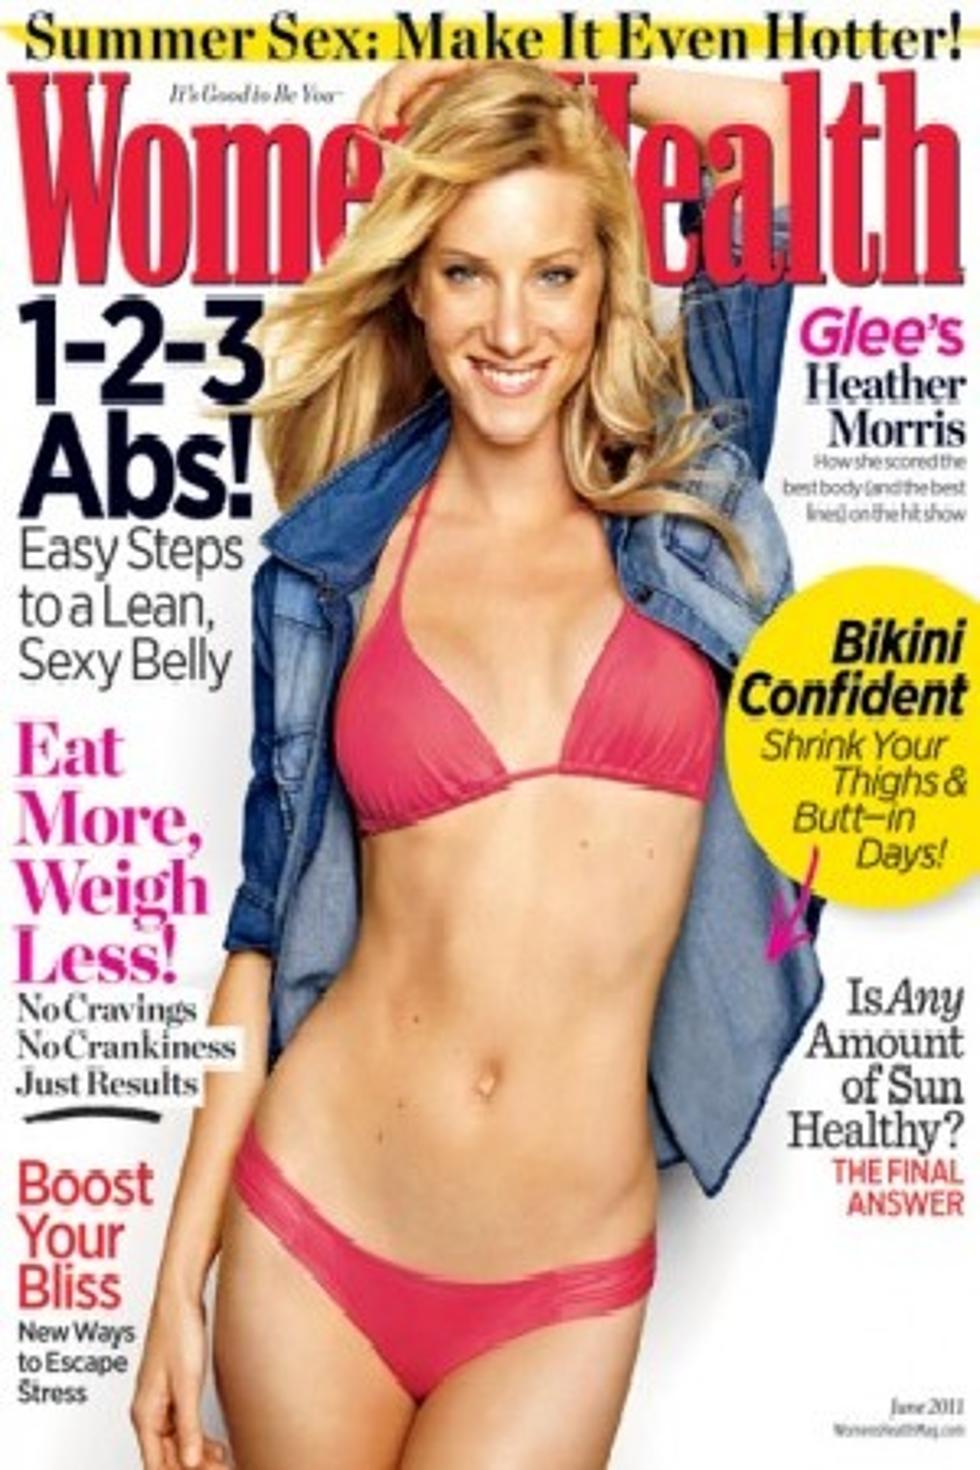 ‘Glee’ Star Heather Morris Flaunts Her Bod on Cover of New Women’s Health, Compares Herself to Brittany